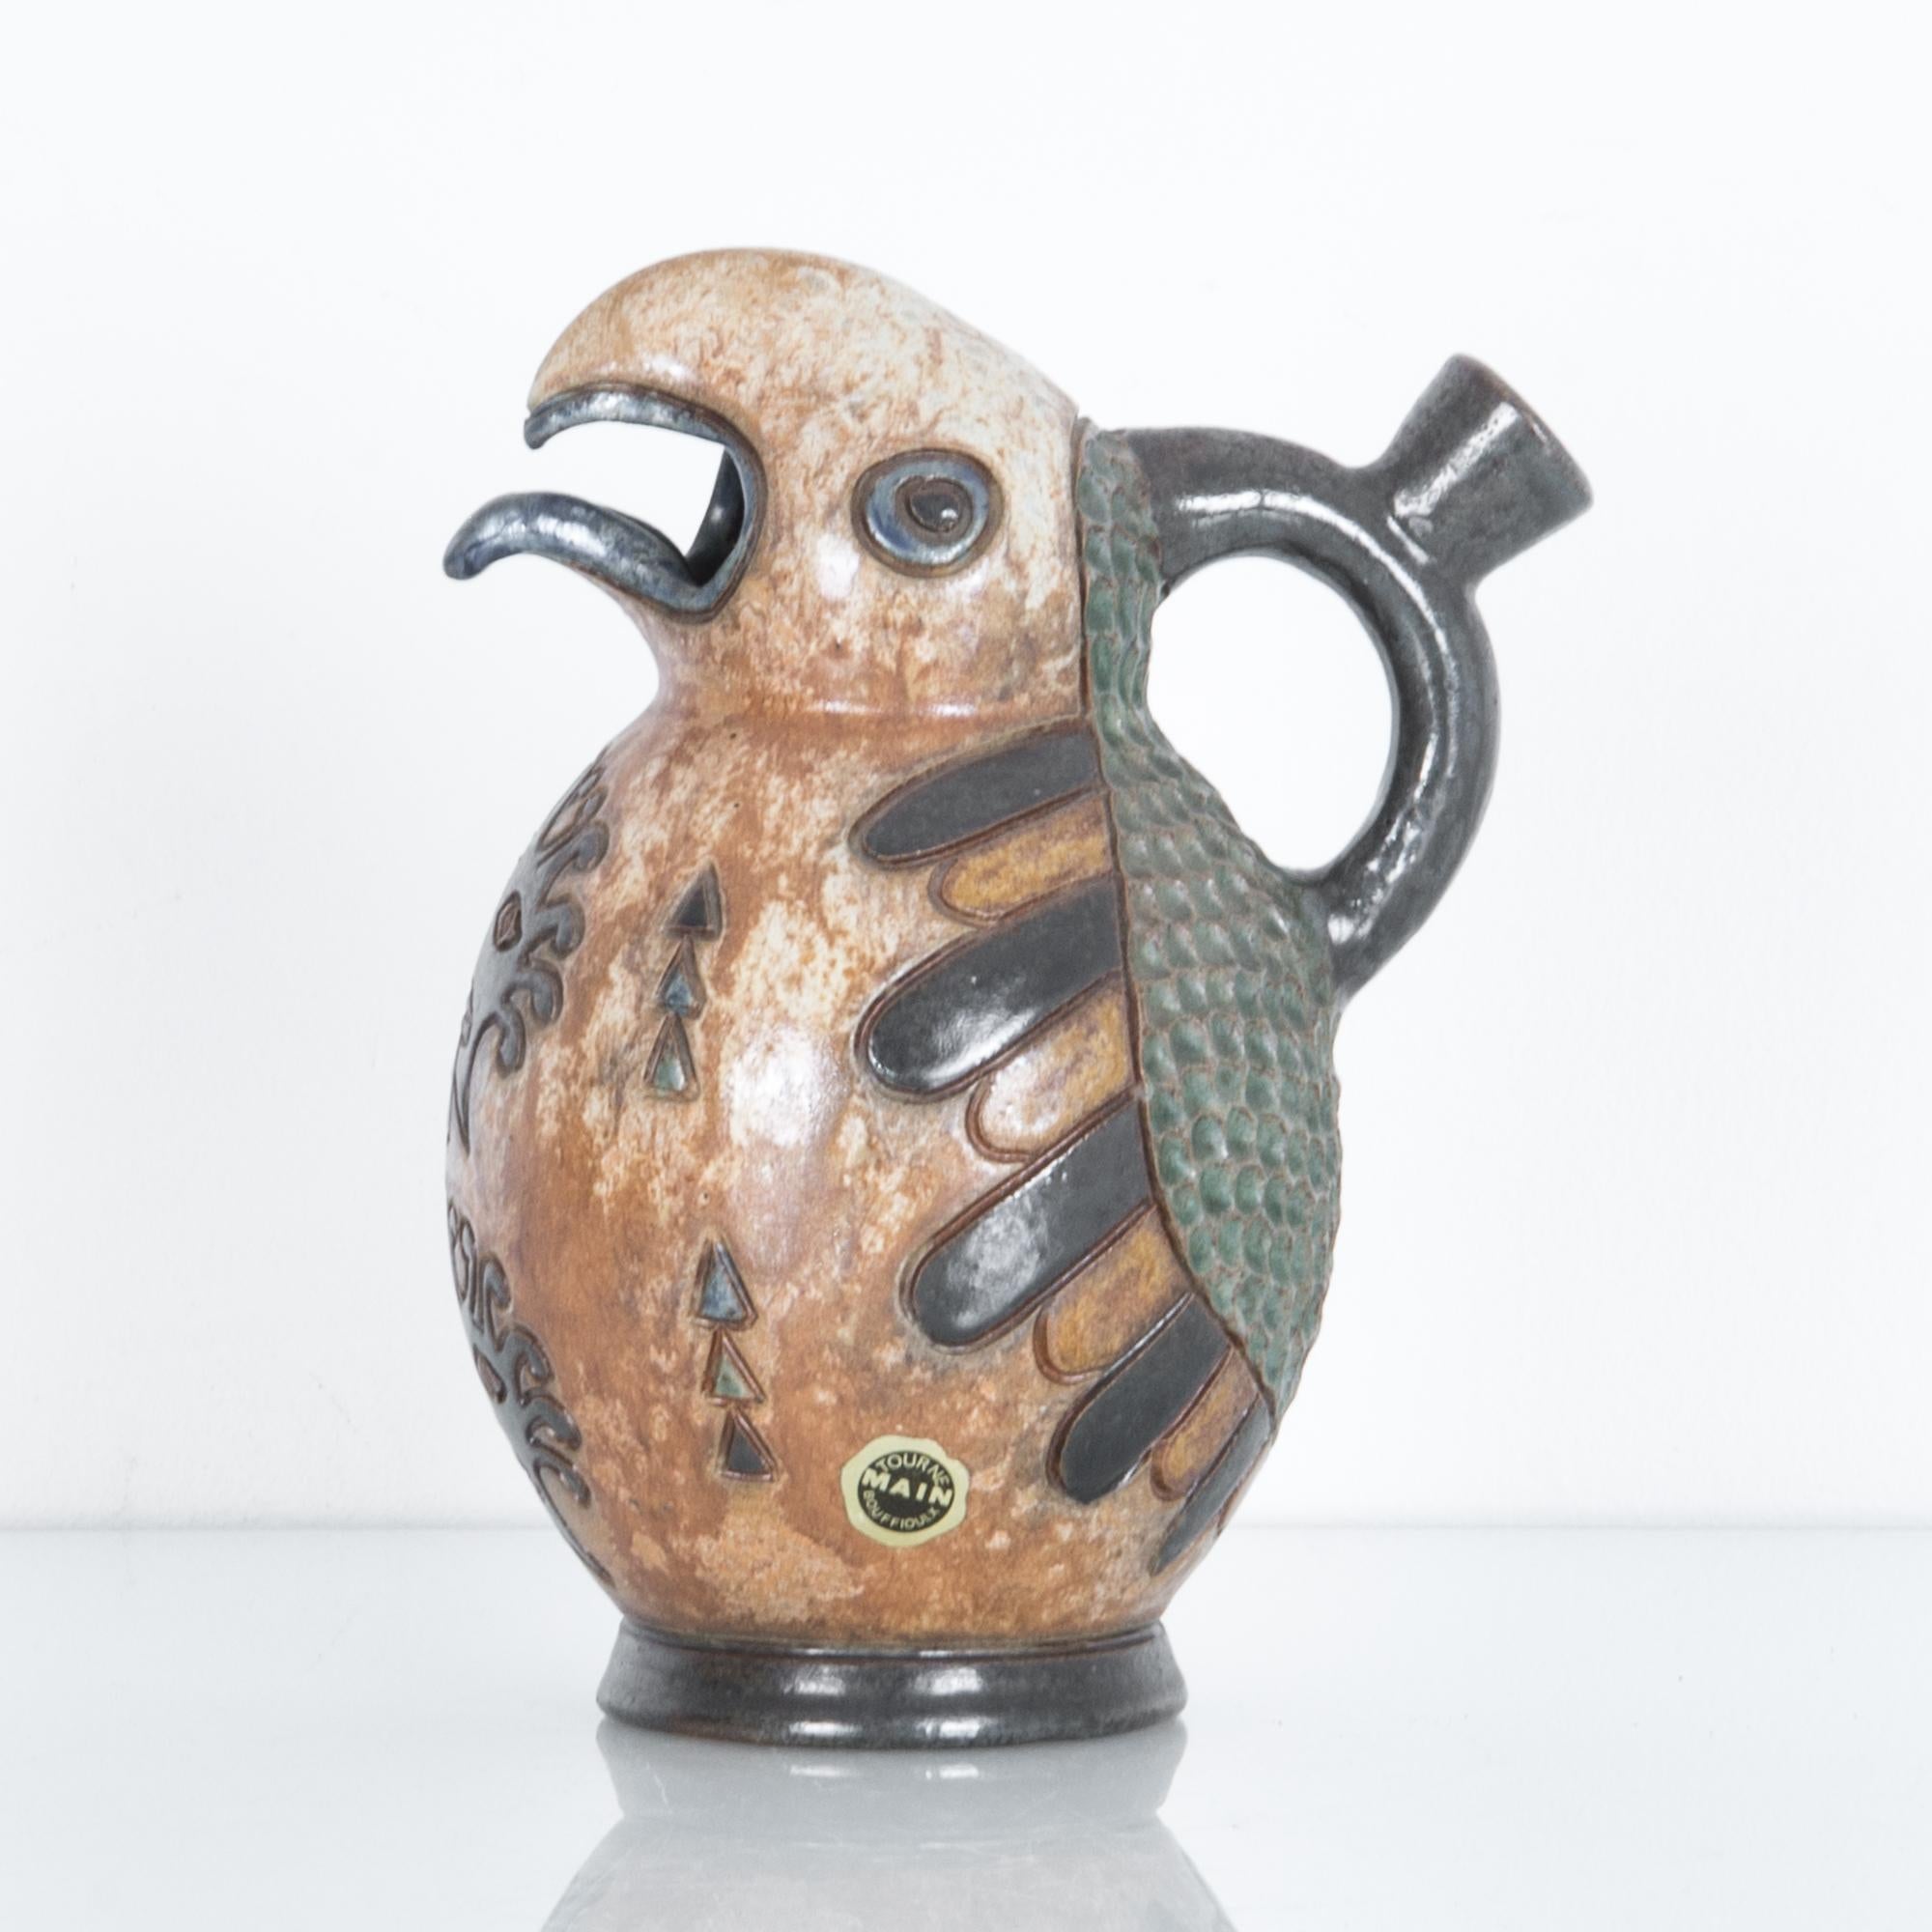 Sculptural ceramic stoneware vessel from Belgium, circa 1950. These distinctive ceramics pieces were produced in mid-20th century Belgium in the Bouffioulx region. Featuring distinctive graphic textured glazes on simple forms this local style was